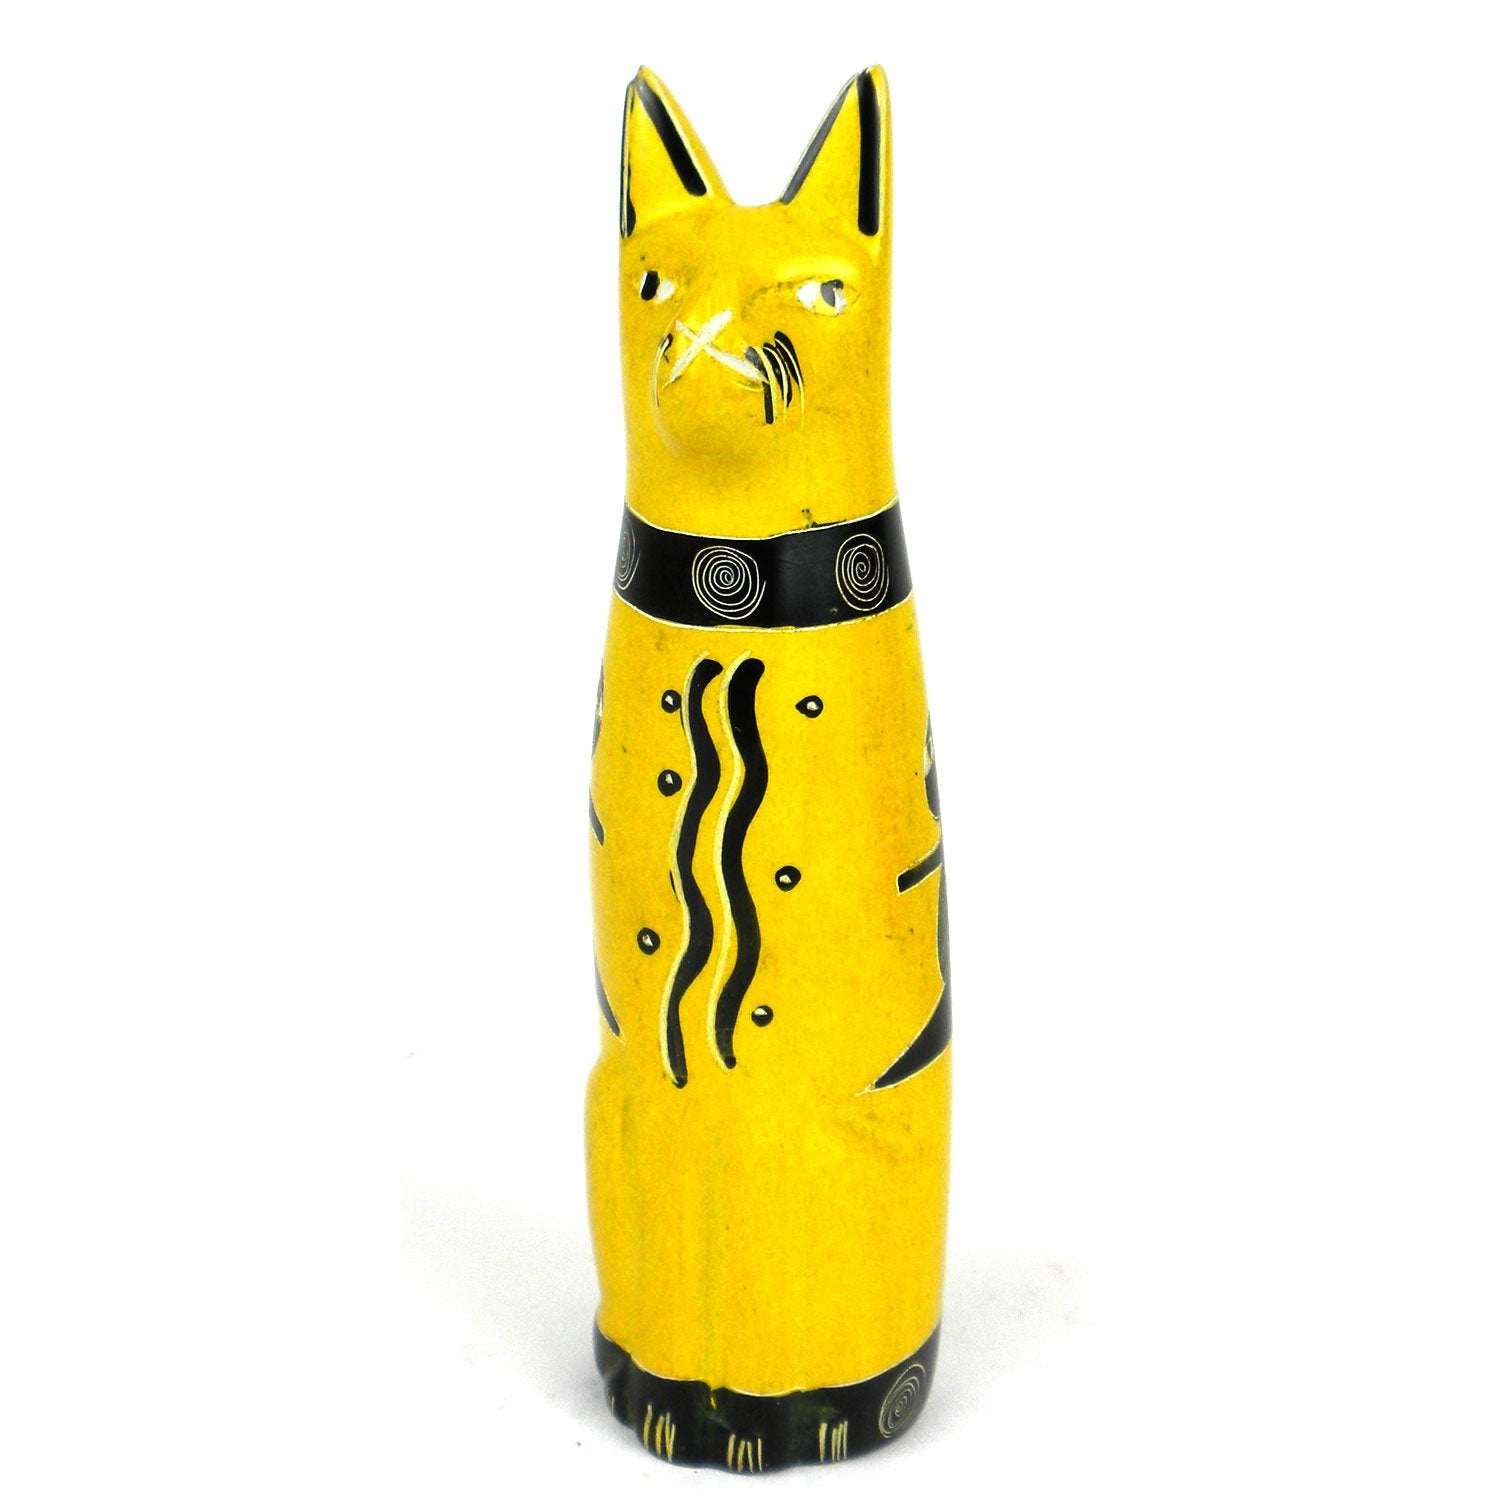 Soapstone Sitting Cat Sculpture; Yellow, 5" Inch - Linda Kay Gifford’s - Those Nasty Women TALK! by SWEETSurvivor